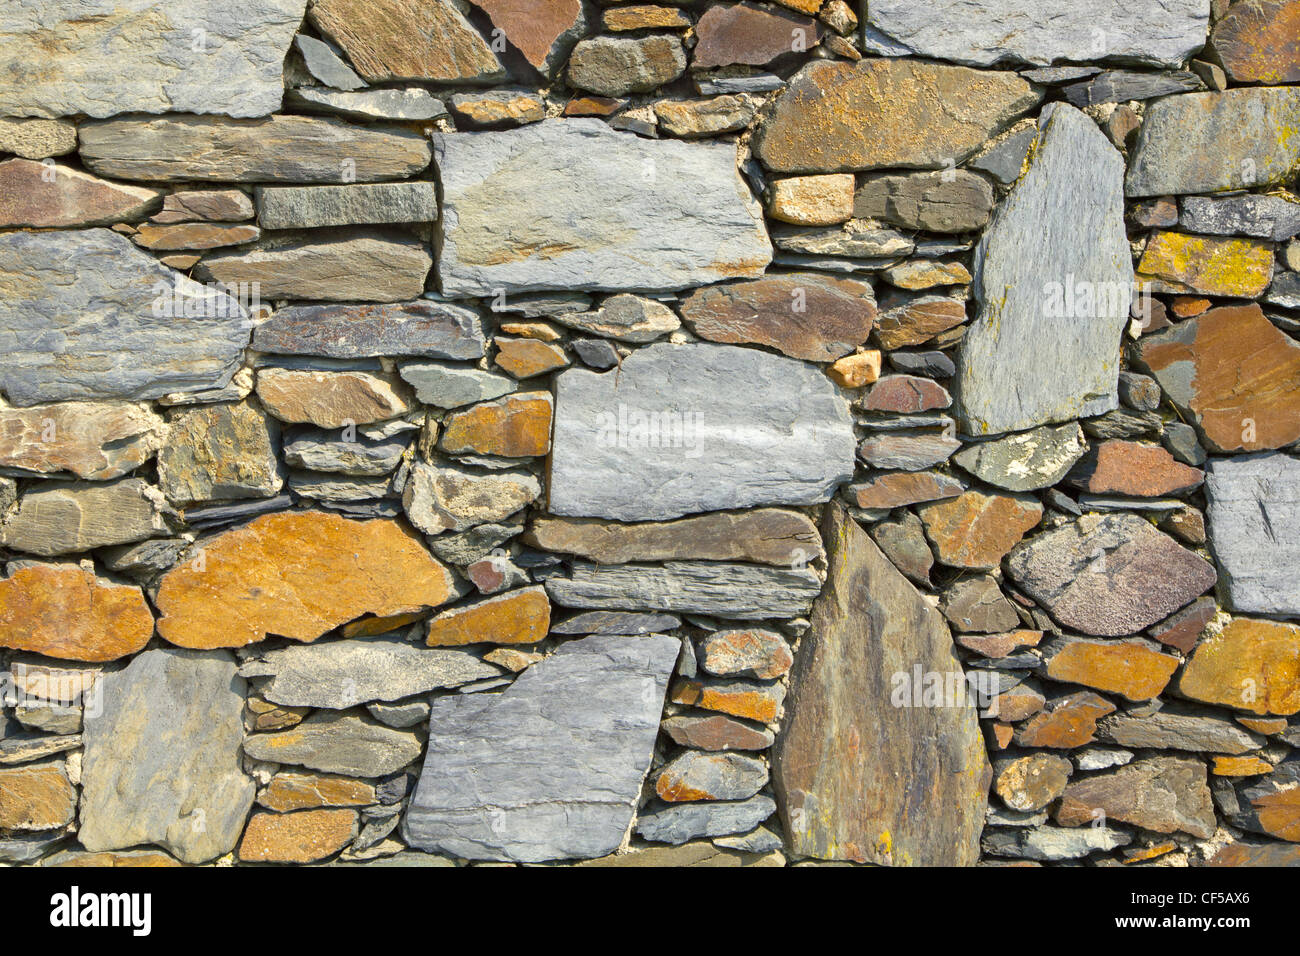 A dry stone wall in Newport, Rhode Island Stock Photo